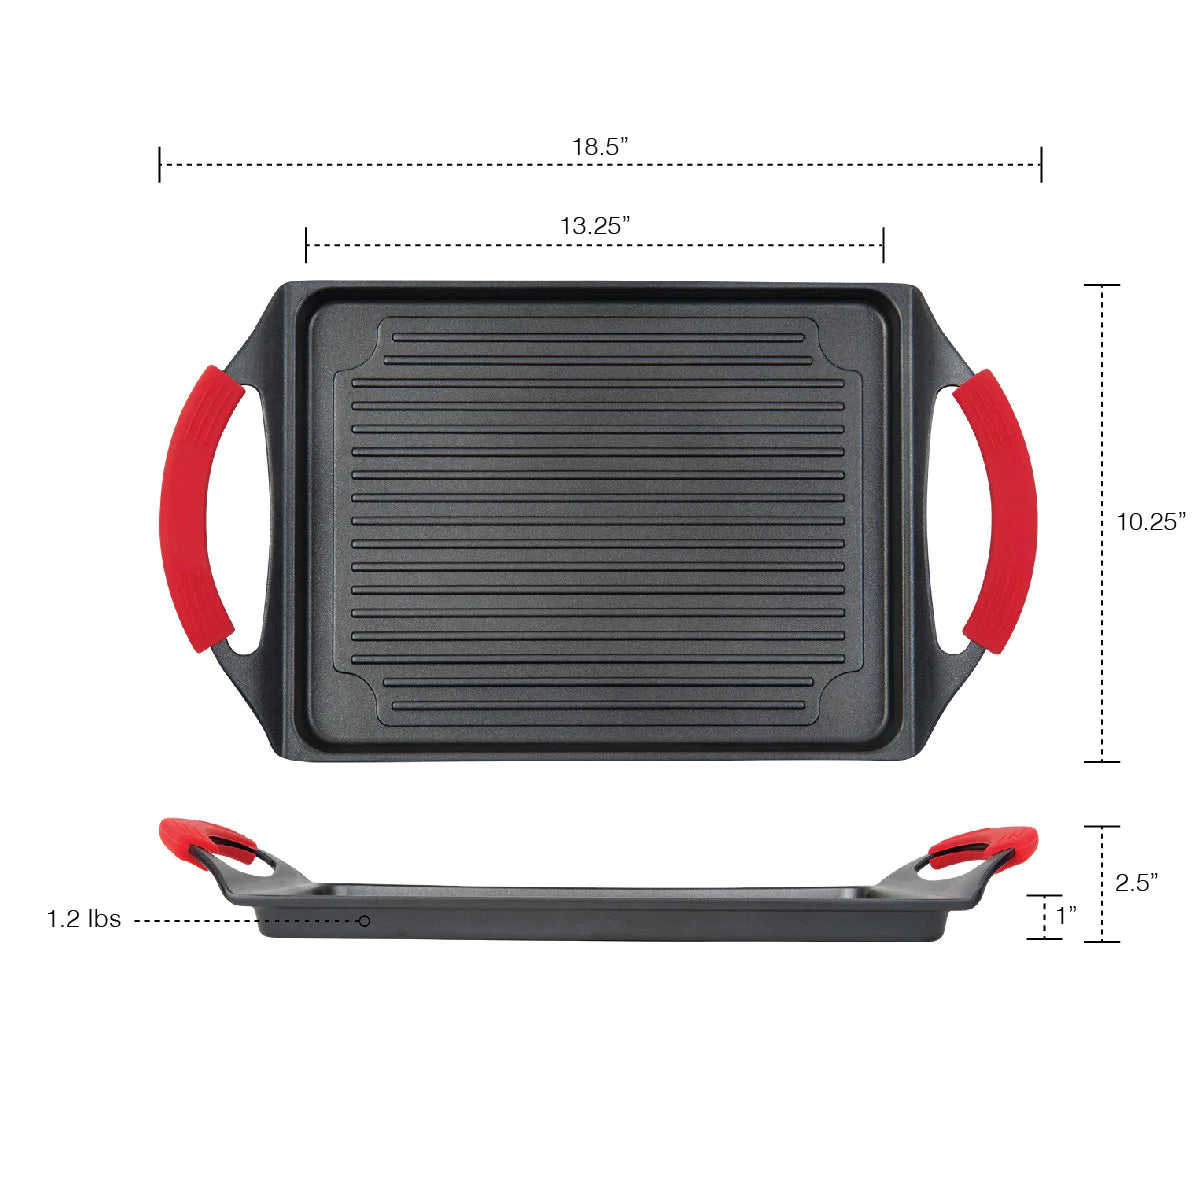 MASTERPAN Innovative Series 13” Grill Plate Non-stick Cast Aluminum With Silicone Handle Grips